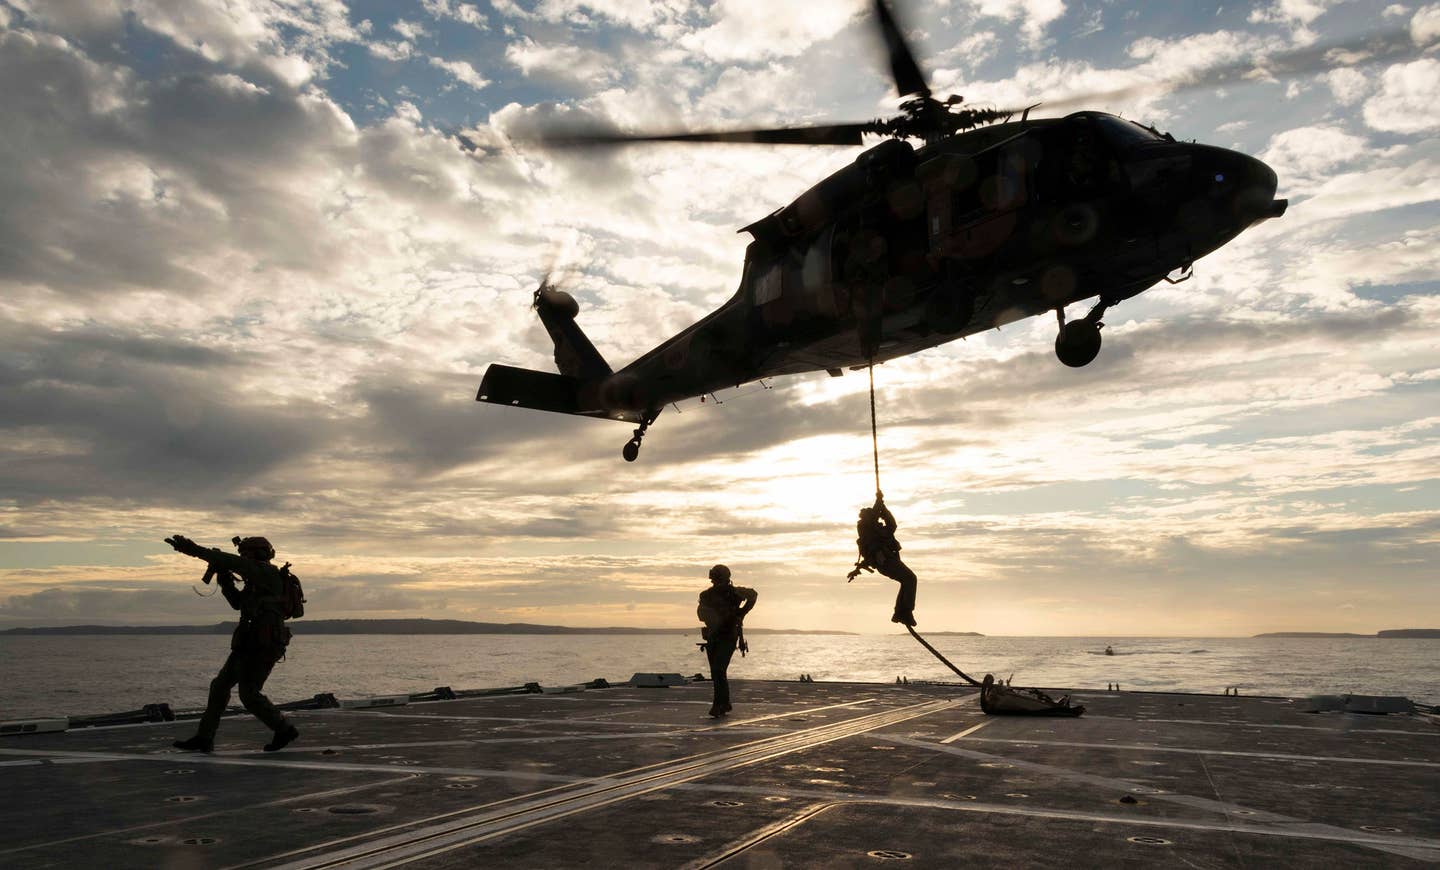 Australian Army soldiers from the 2nd Commando Regiment conduct a fast-rope descent from a 6th Aviation Regiment S-70A-9 Black Hawk helicopter onto a Royal Australian Navy vessel during maritime counterterrorism training in Jervis Bay, southern New South Wales, in early June 2020. <em>COMMONWEALTH OF AUSTRALIA, DEPARTMENT OF DEFENSE</em>